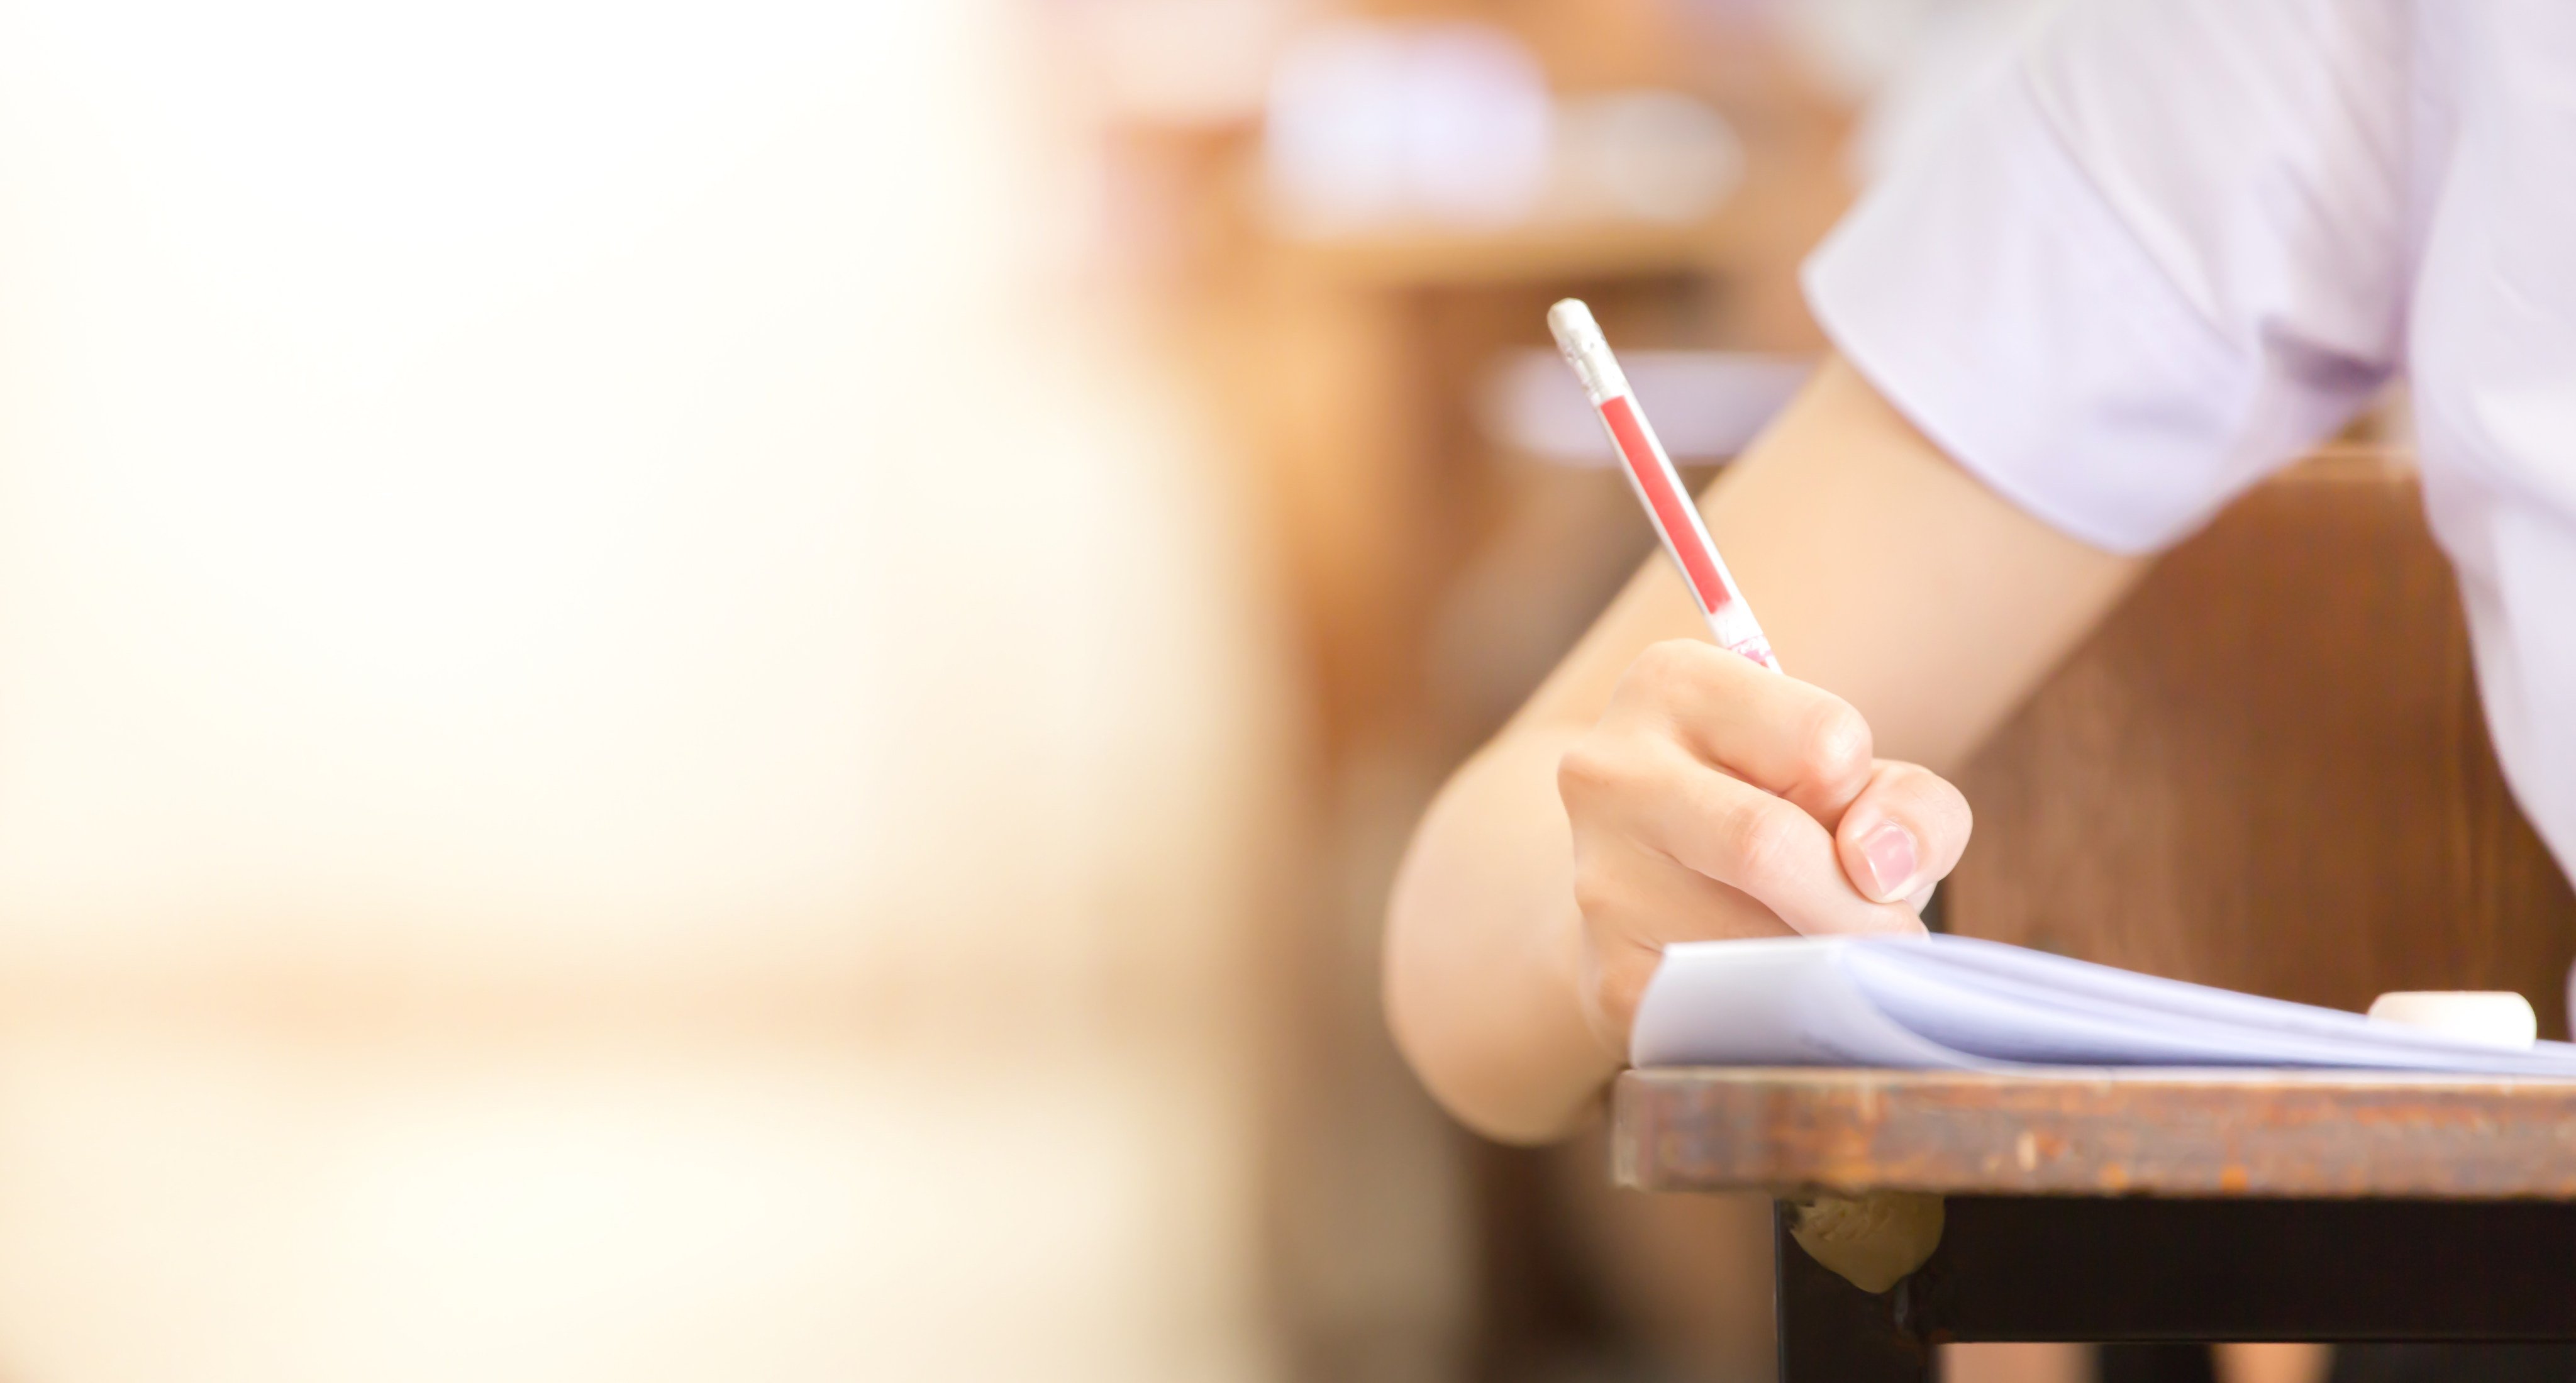 Though the DSE history exam included some surprises, both a tutor and an exam taker said the test was manageable. Photo: Shutterstock